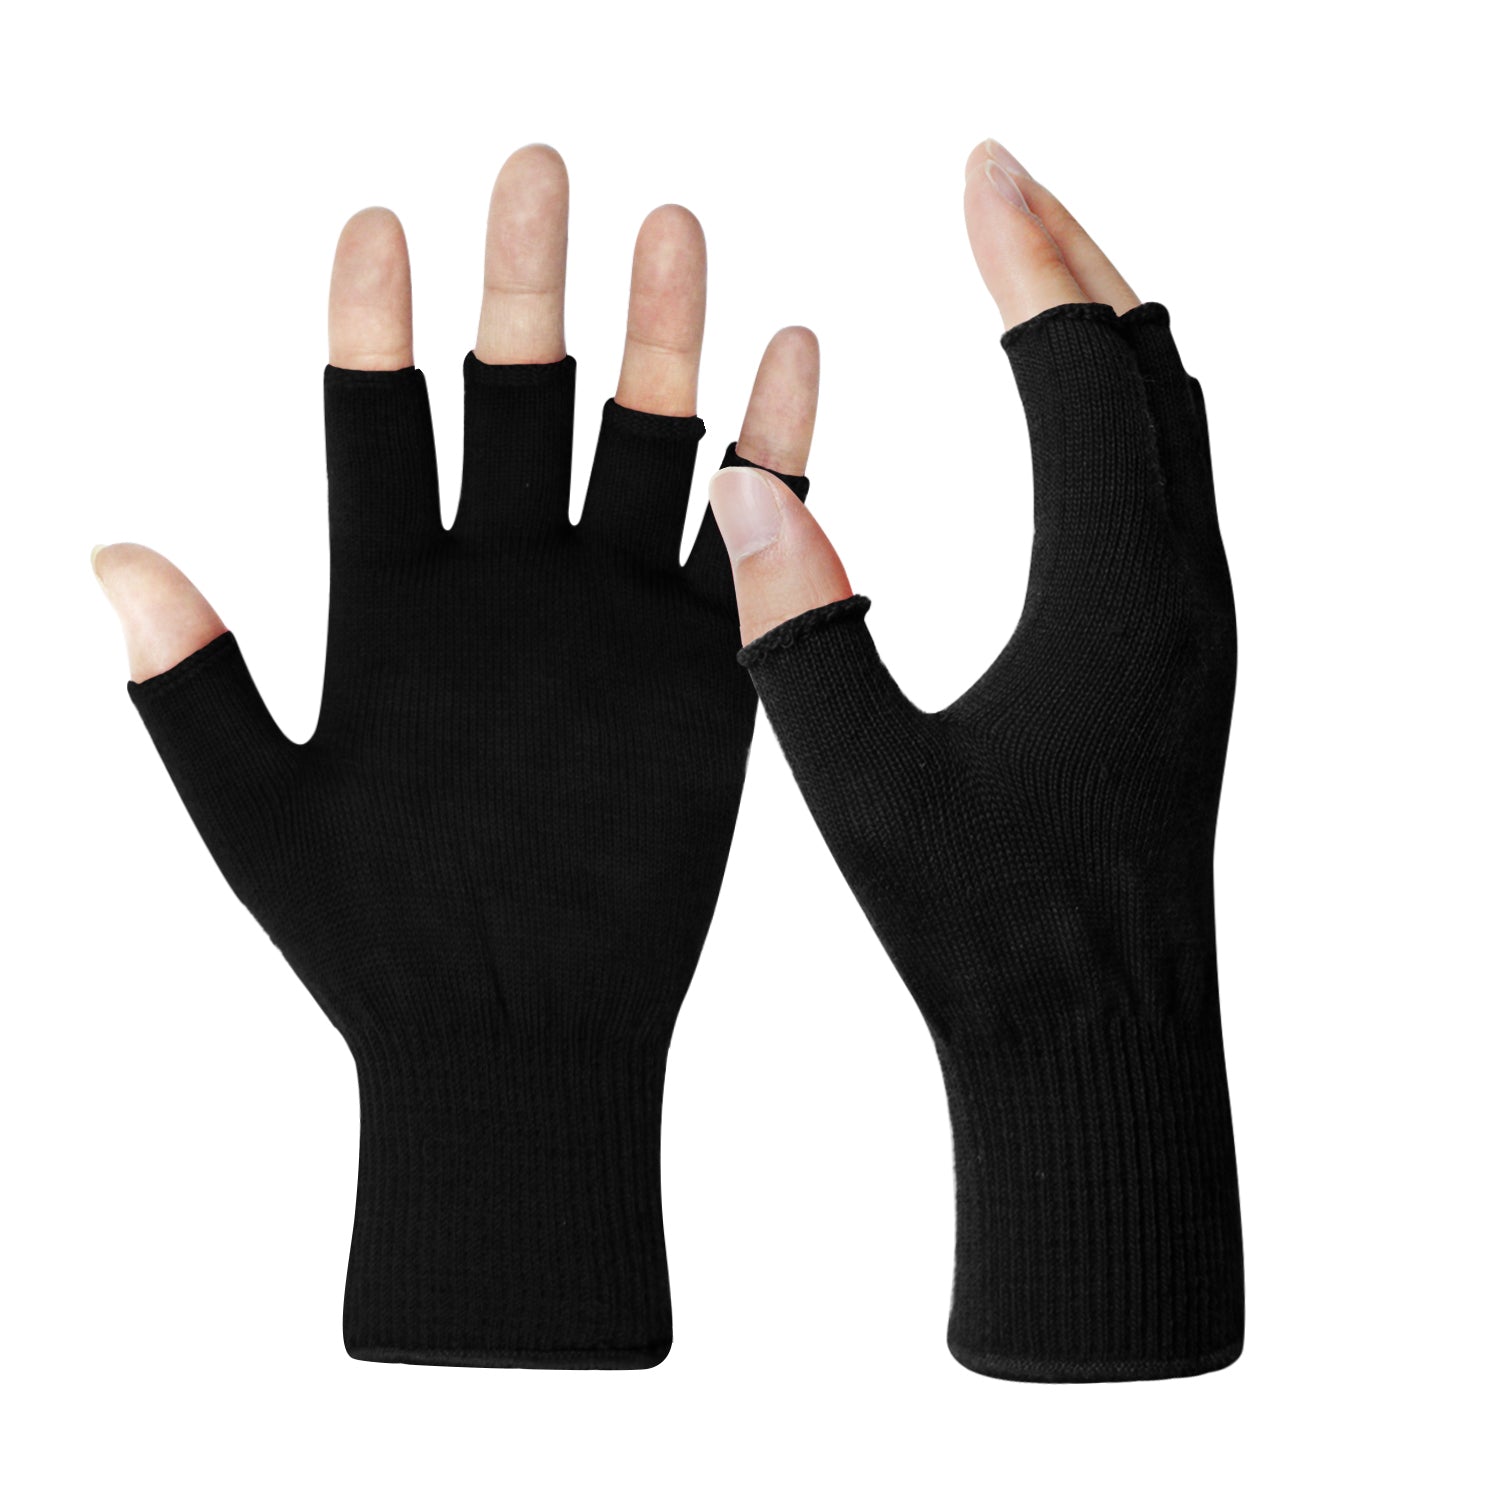 ALL-DAY Protective Fingerless Glove Liners | Healthcare Gloves |  Gloves-Online